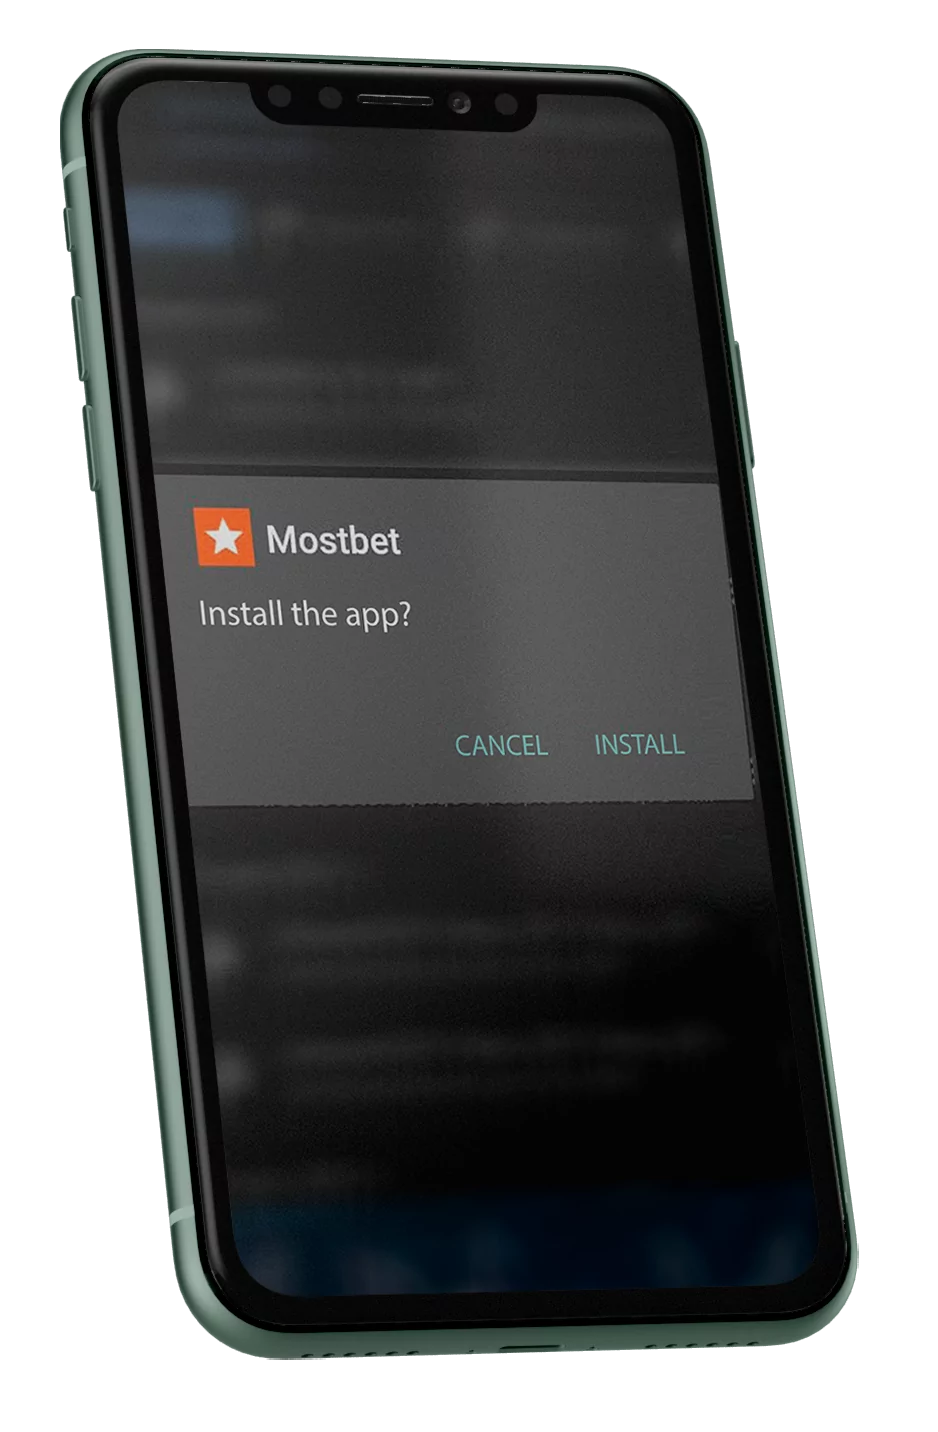 Step 3: Install the Mostbet App on your device.